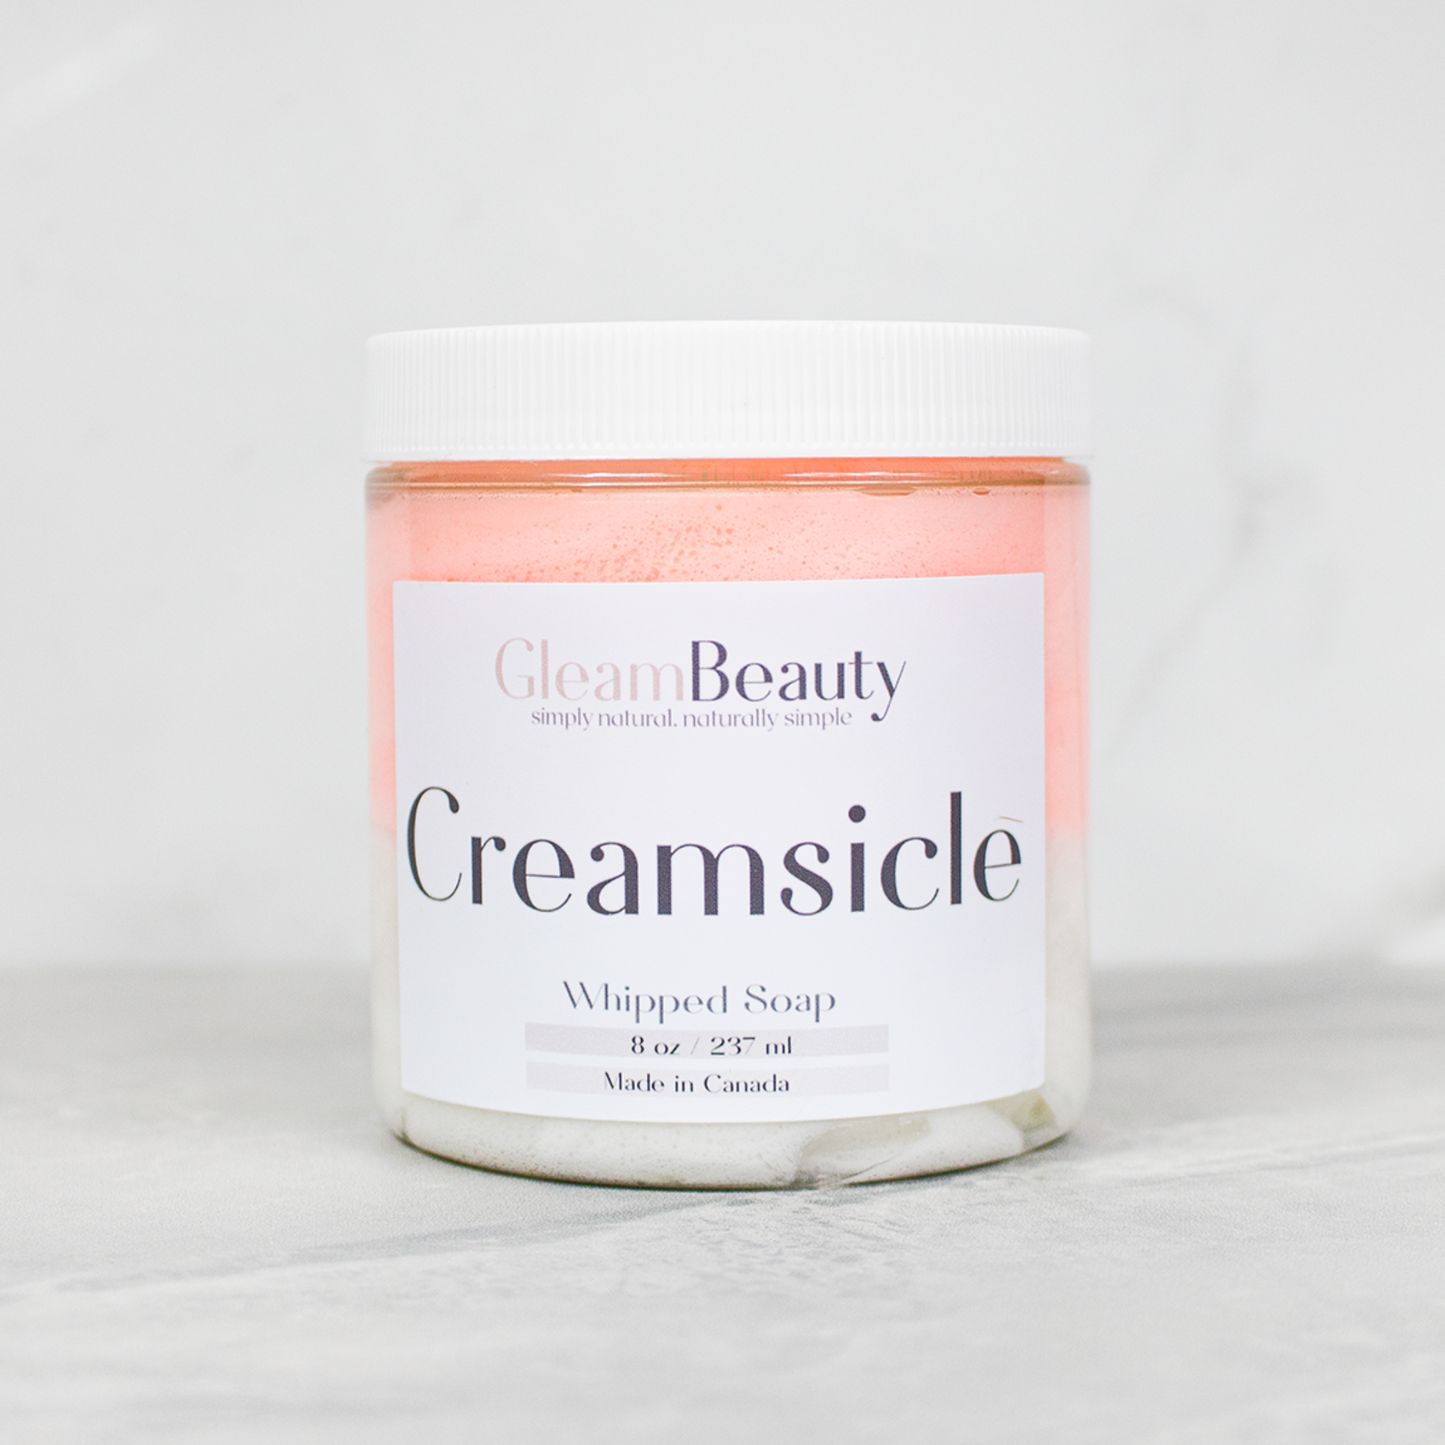 Creamsicle Whipped Soap